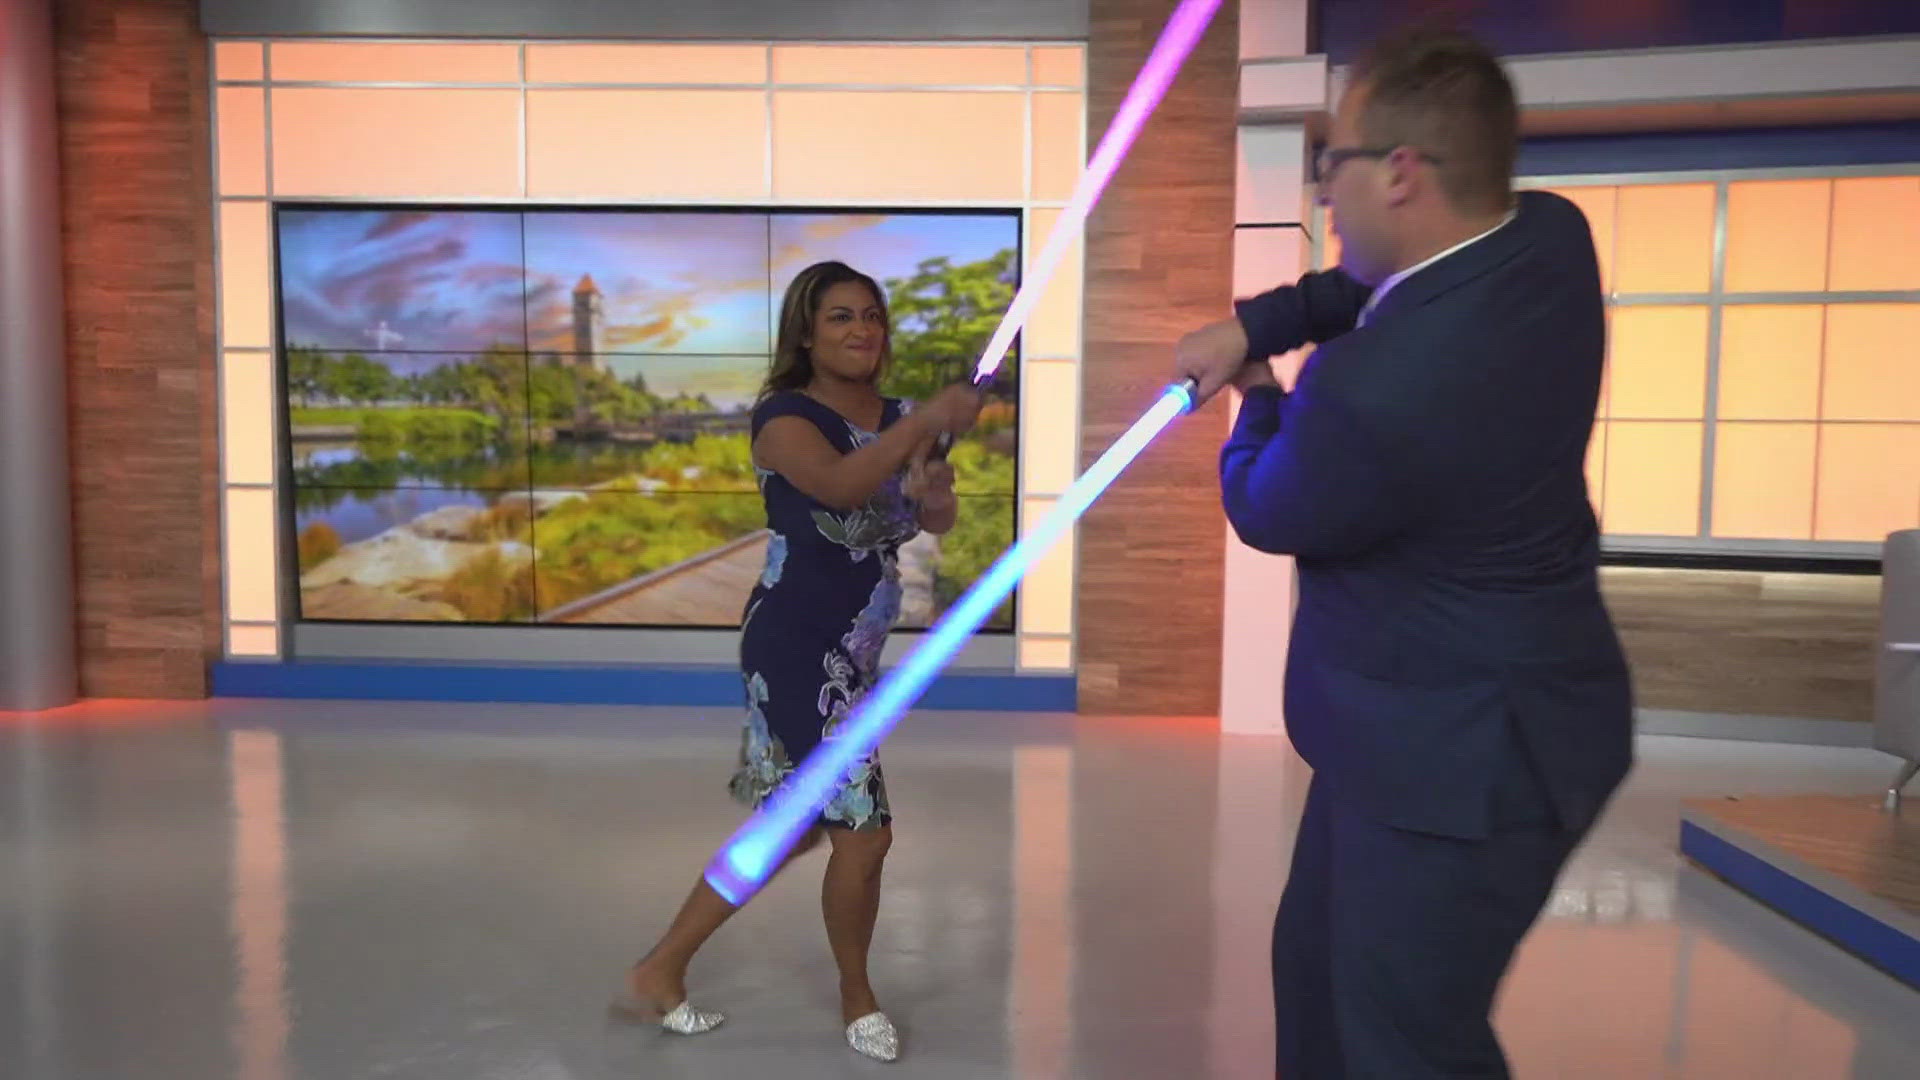 Tim, Thomas and Channing battled it out with lightsabers and one anchor was the clear winner!